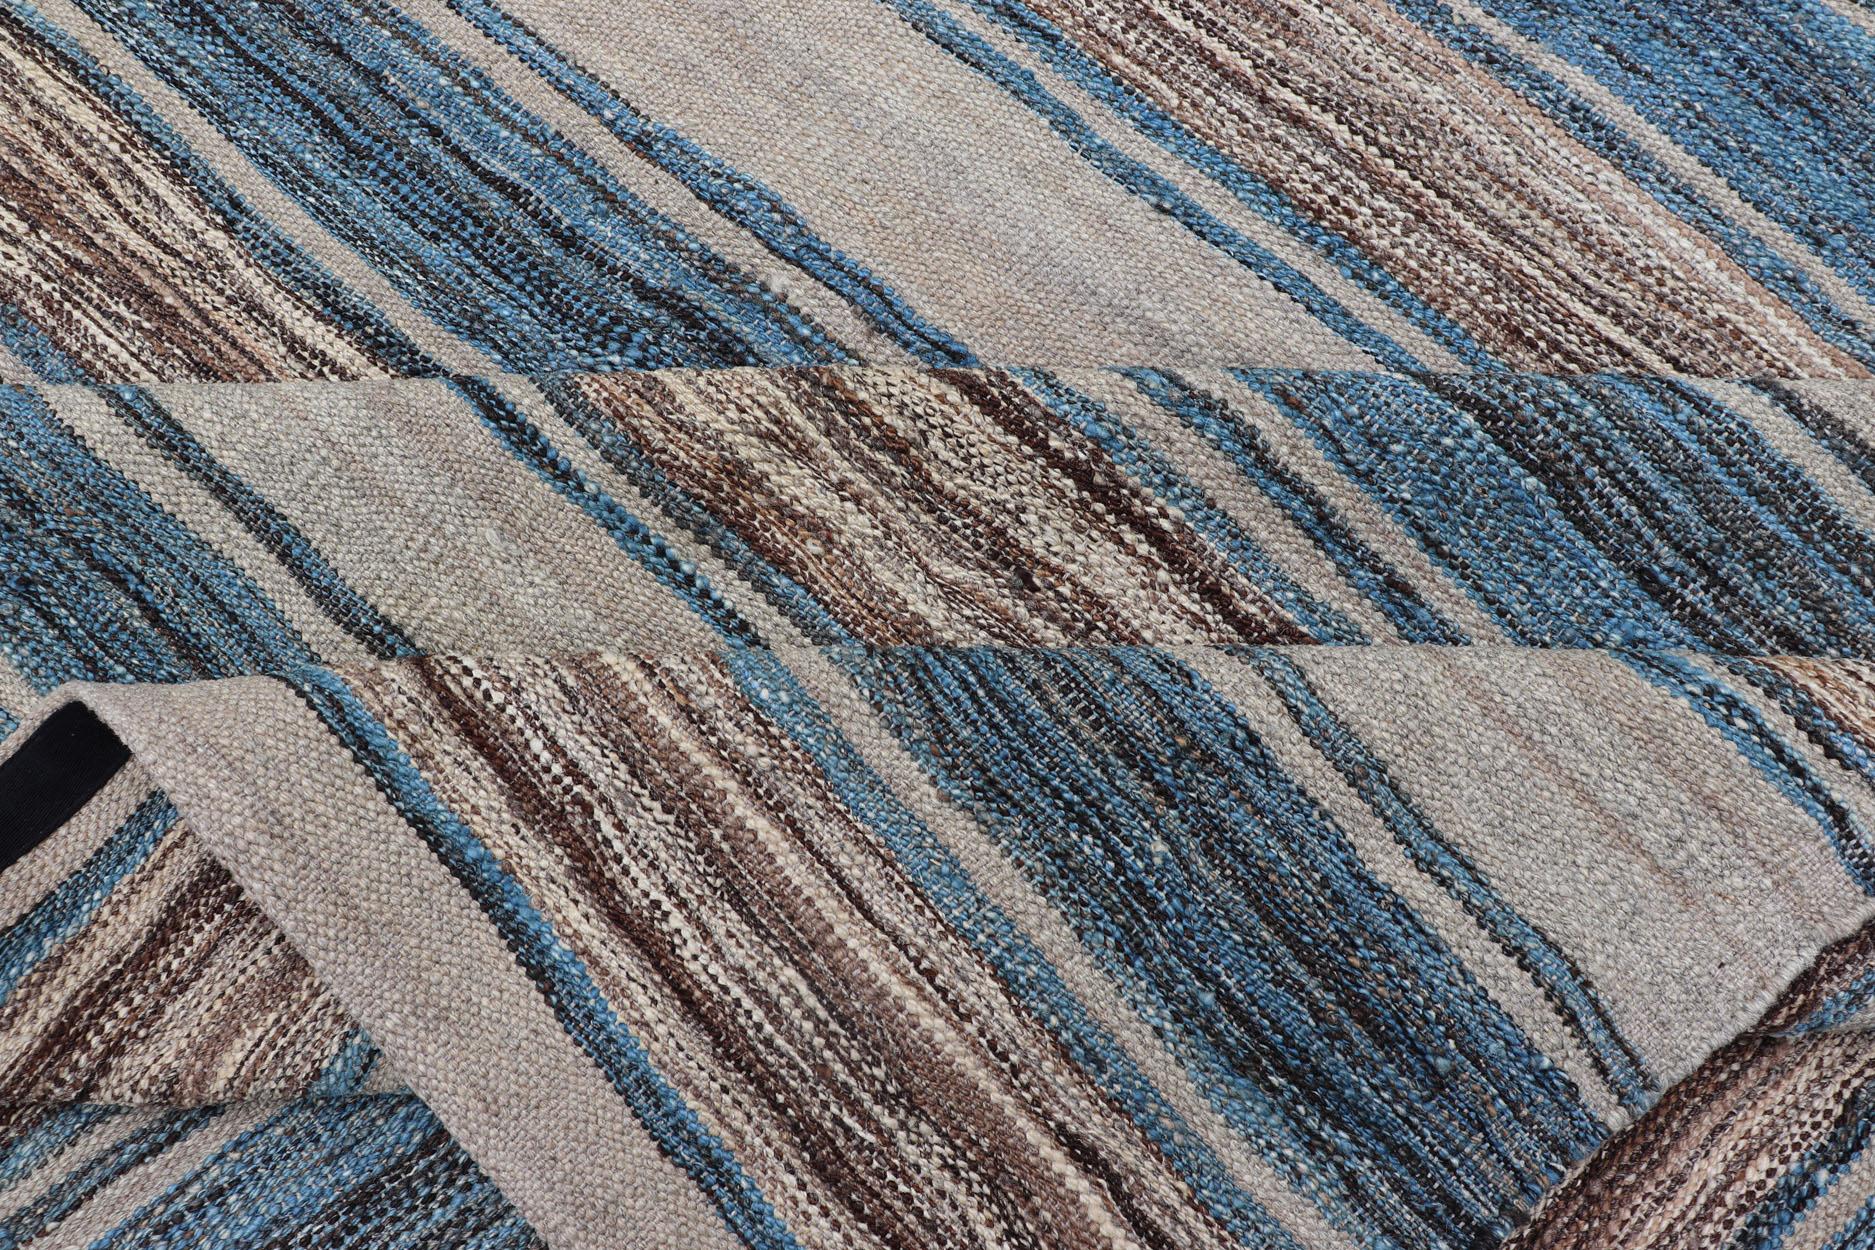 Versatile Striped Design and Natural Brown, Cream, and Blue Flat-Weave Kilim For Sale 7